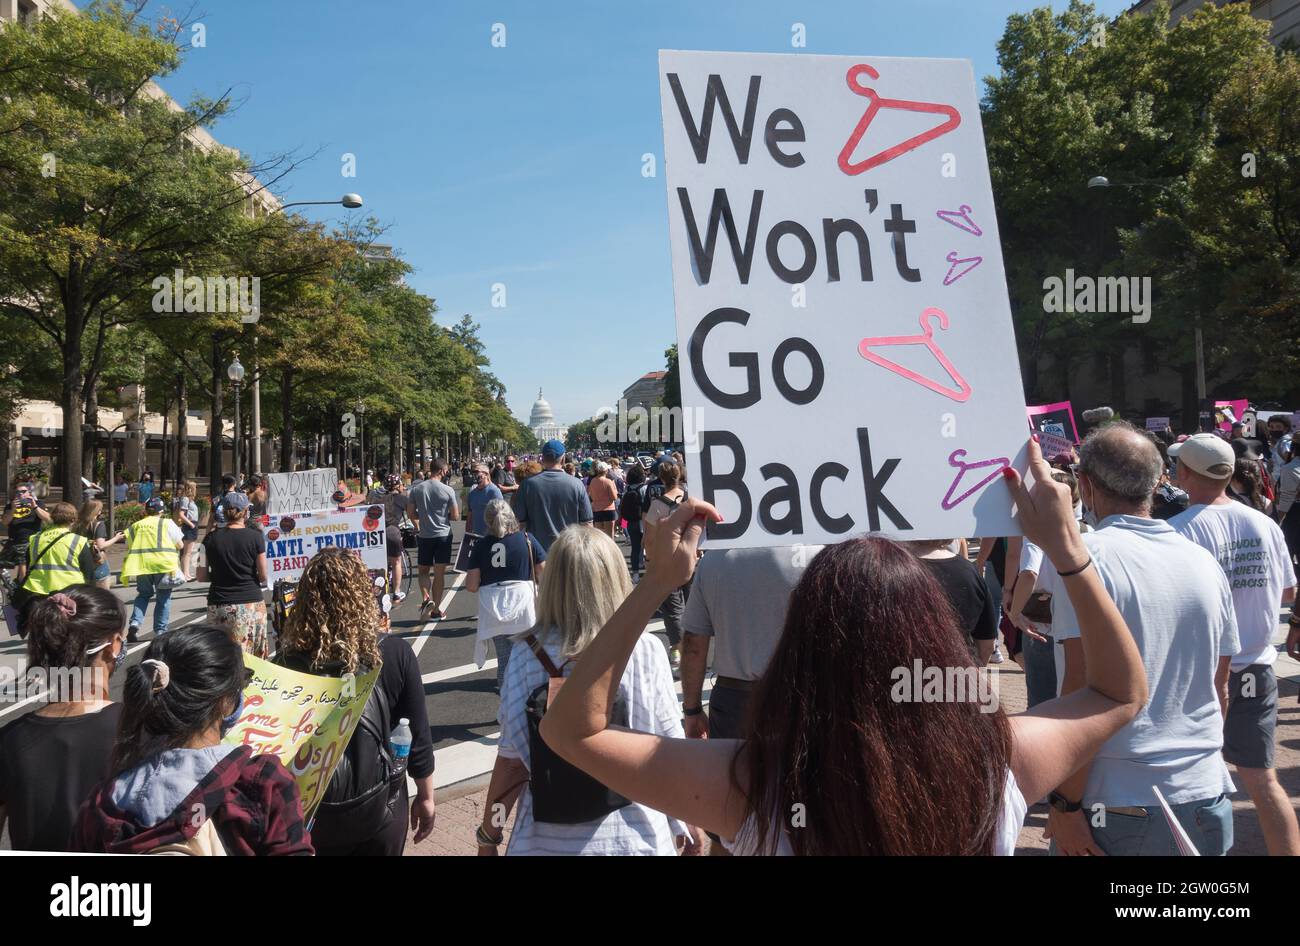 2021 Women's march in Washington DC, demanding continued access to abortion after the ban on most abortions in Texas, and the looming threat to Roe v Wade in the upcoming Supreme Court session. Thousands march from rally at Freedom Plaza to the US Supreme Court. Oct. 2, 2021. Stock Photo